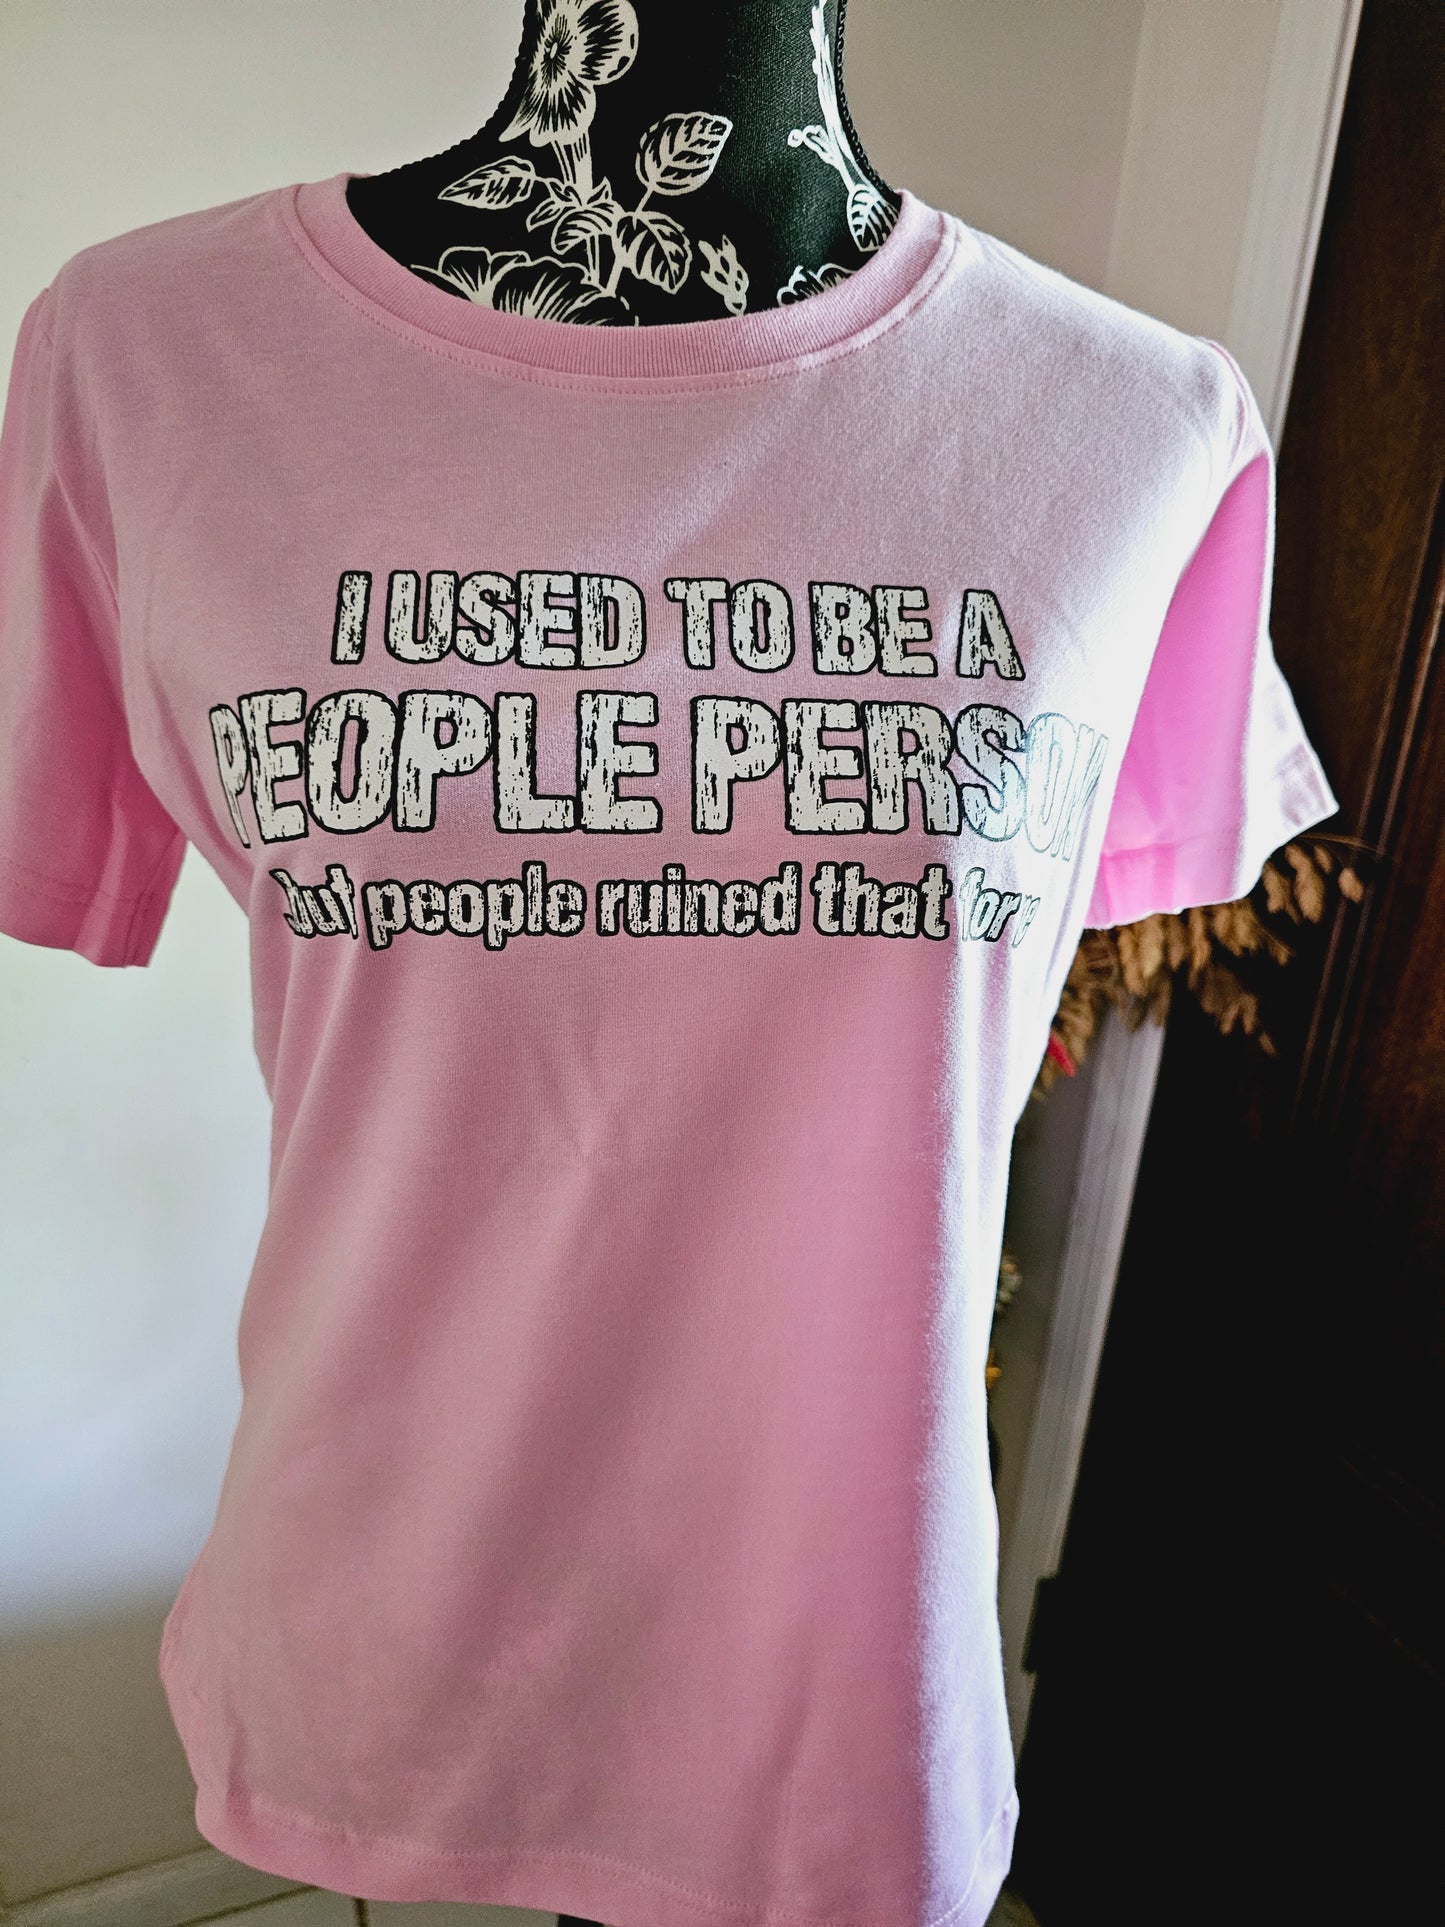 I Used To Be A People Person But People Ruined That For Me Handmade Graphic T-Shirt